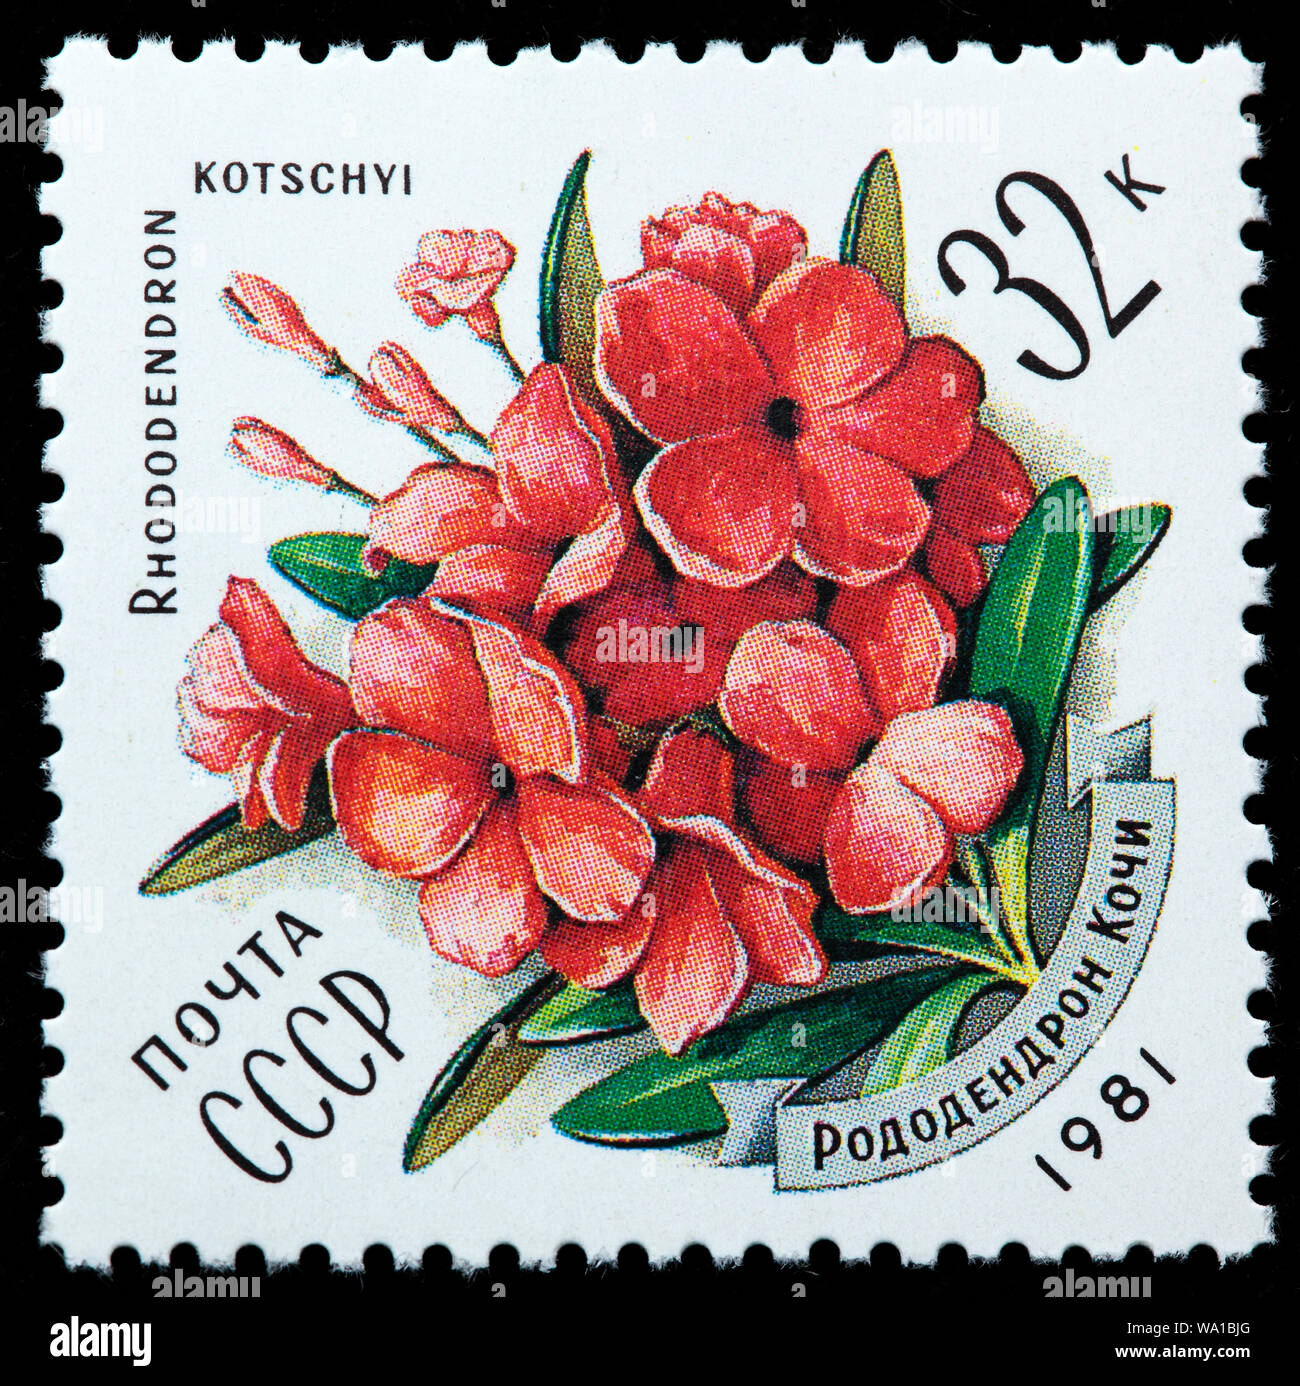 Rhododendron myrtifolium, Rhododendron kotschyi, Flowers of the Carpathians, postage stamp, Russia, USSR, 1981 Stock Photo